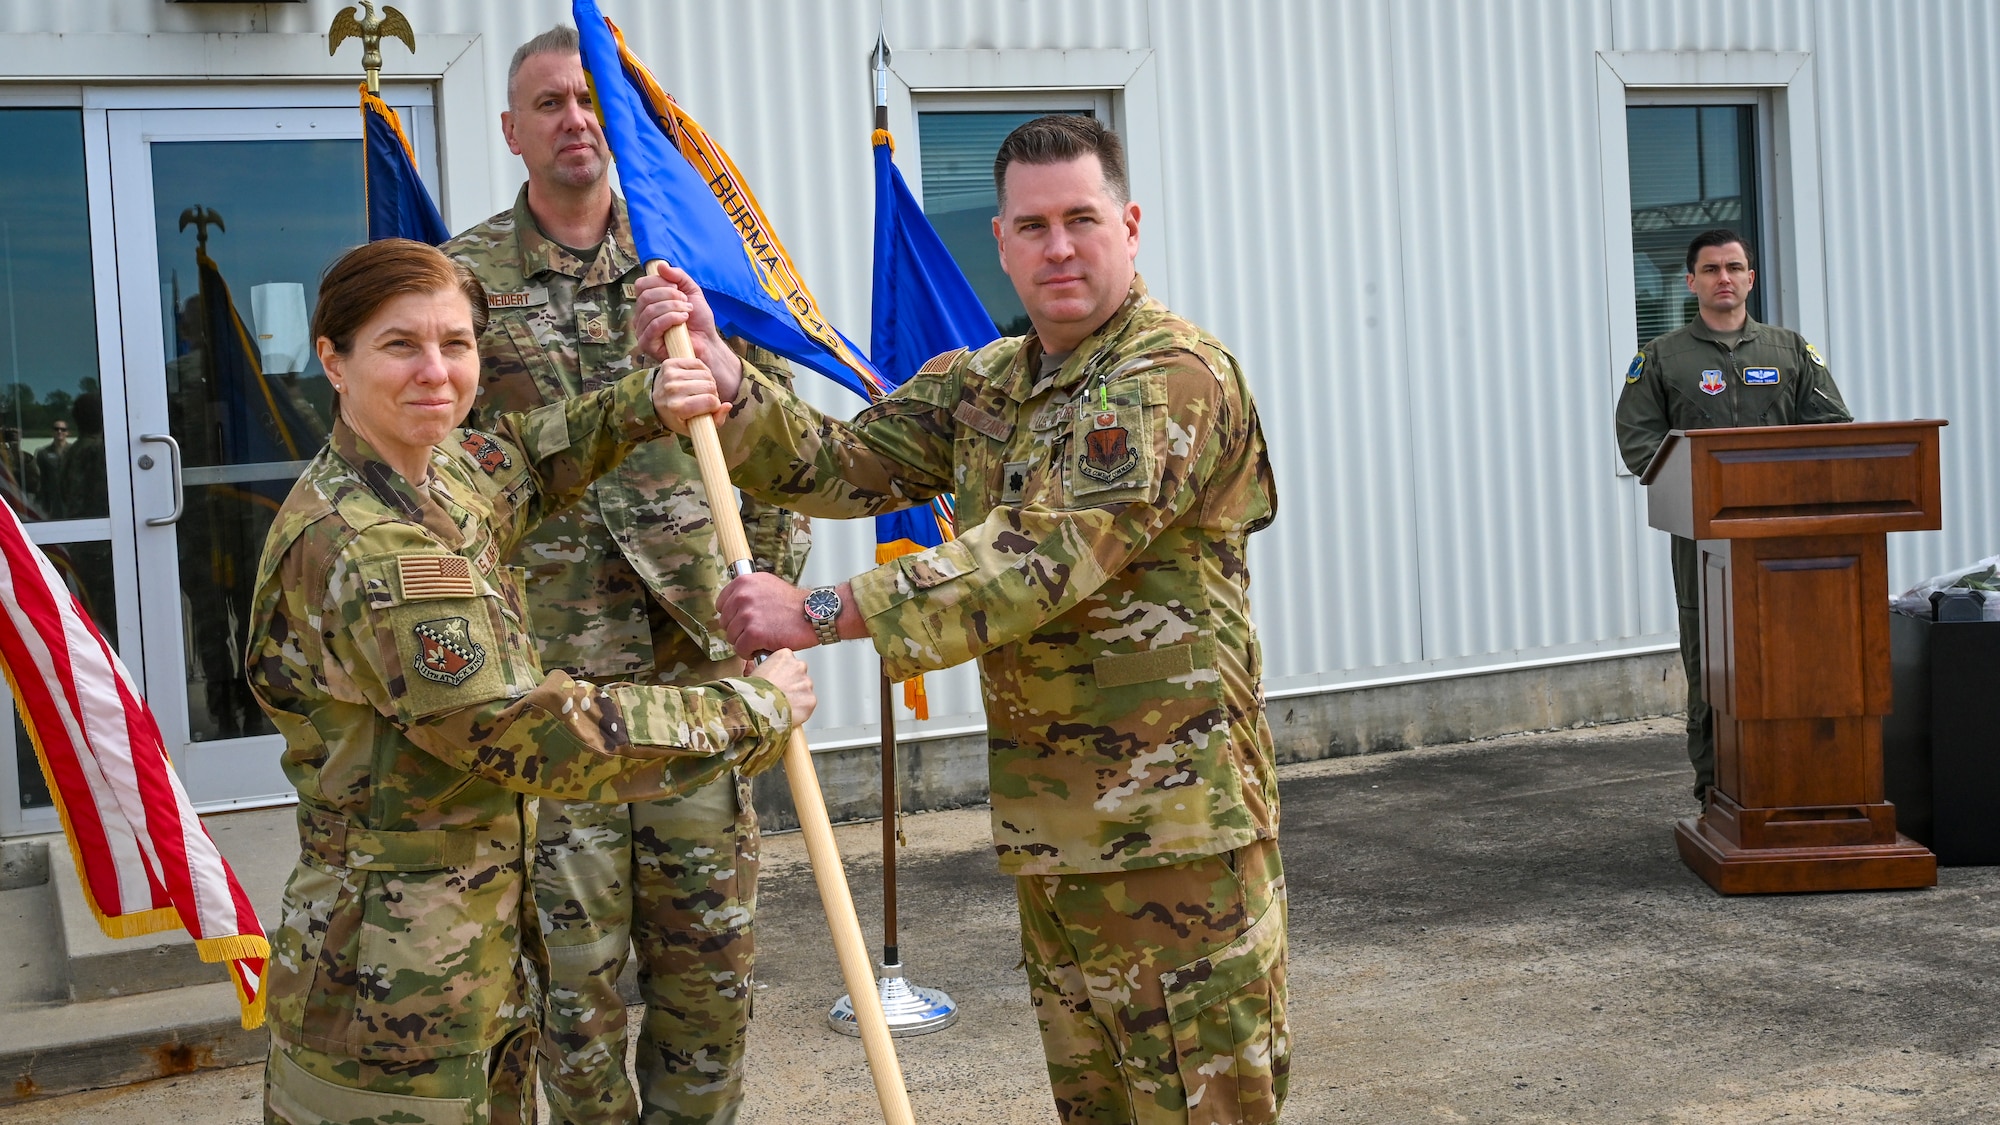 A man and woman in USAF uniforms pose for a photo holding a guidon during a change of command ceremony.